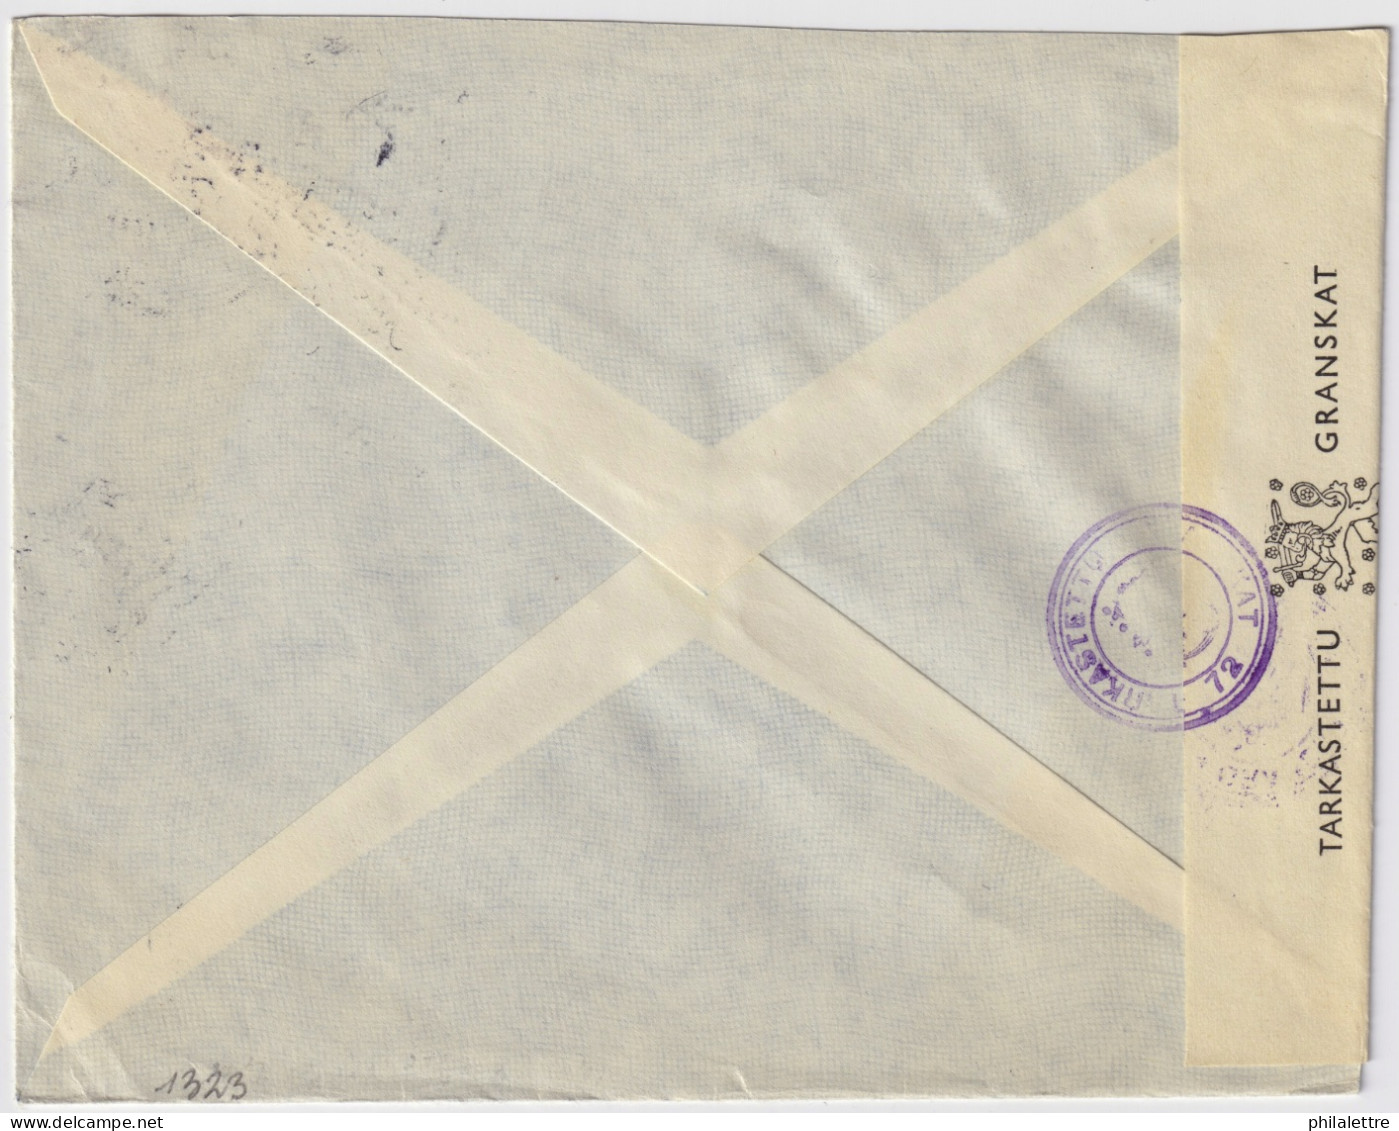 FINLAND - 1942 - Censored Cover From JACOBSTAD To Stockholm, Sweden Franked 2.75Mk - Lettres & Documents